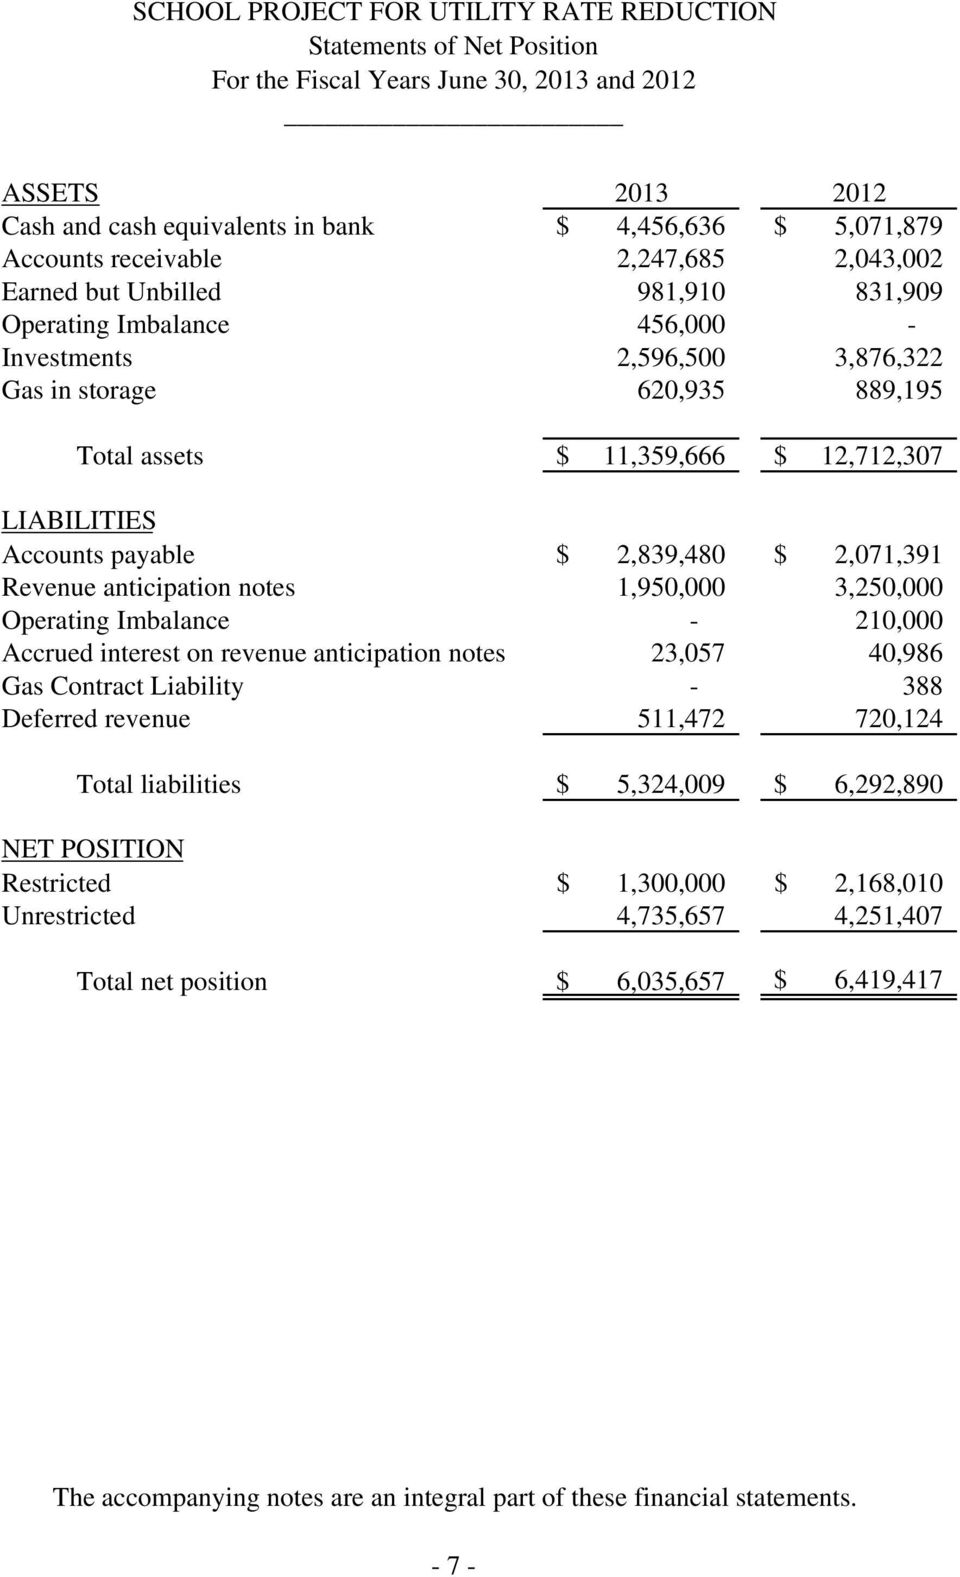 2,071,391 Revenue anticipation notes 1,950,000 3,250,000 Operating Imbalance - 210,000 Accrued interest on revenue anticipation notes 23,057 40,986 Gas Contract Liability - 388 Deferred revenue